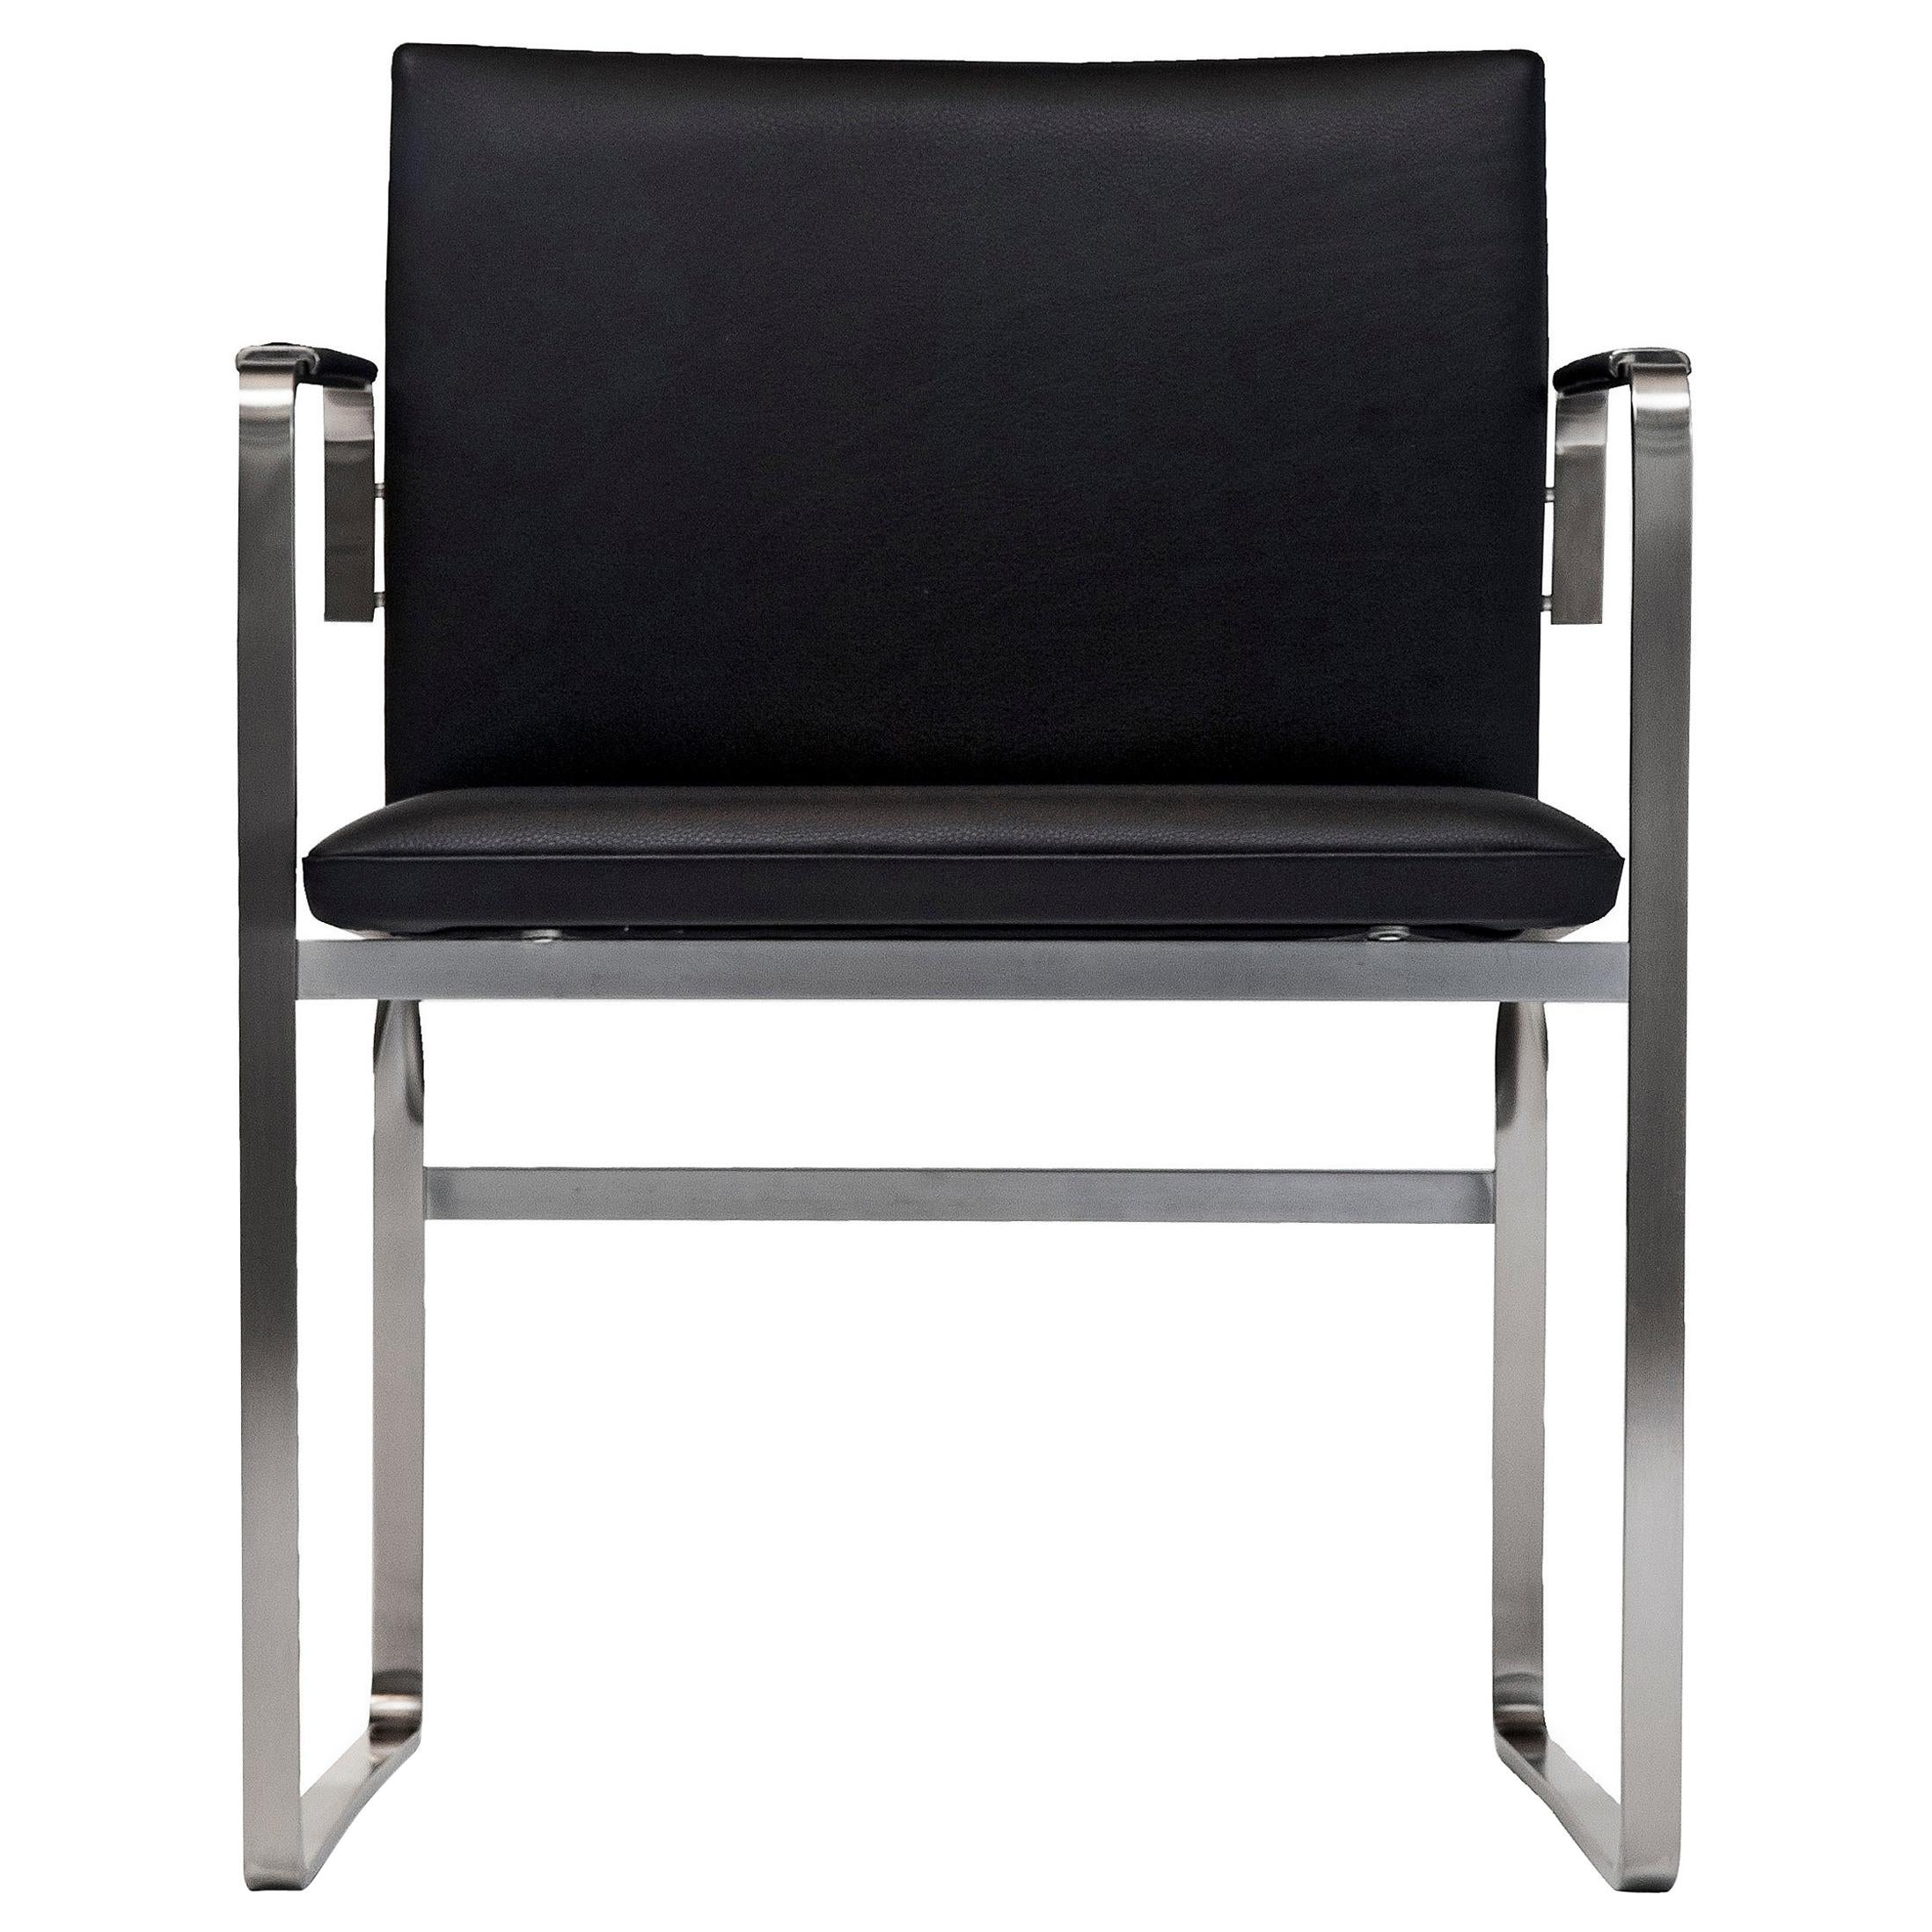 Black (Thor 301) CH111 Chair in Stainless Steel With Foam Seat by Hans J. Wegner